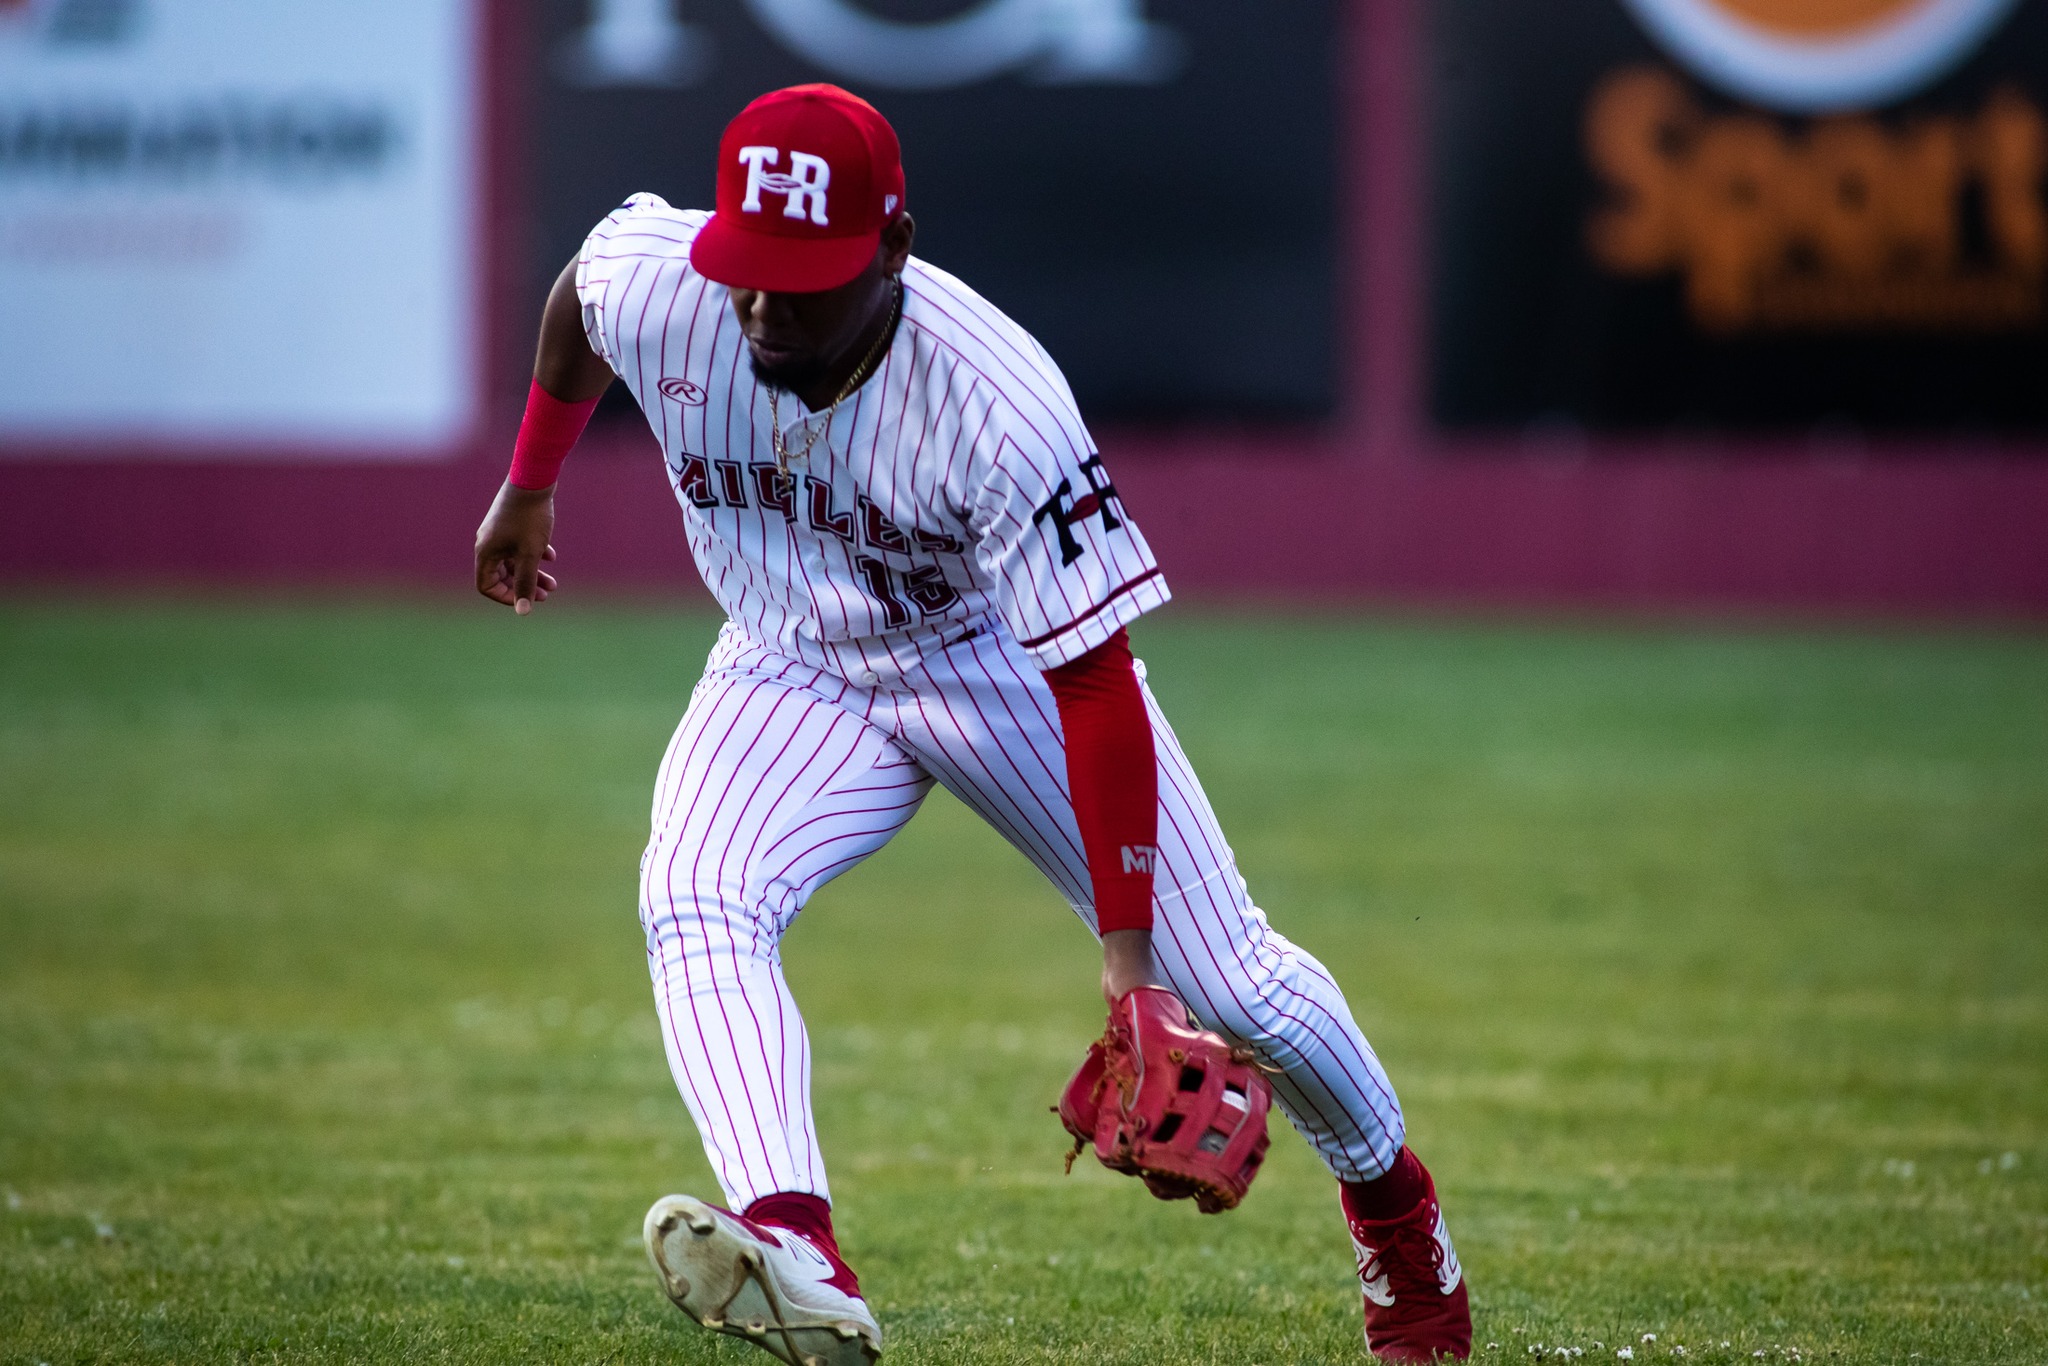 BOULDERS BOUNCE BACK AGAINEST AIGLES TO AVOID SWEEP